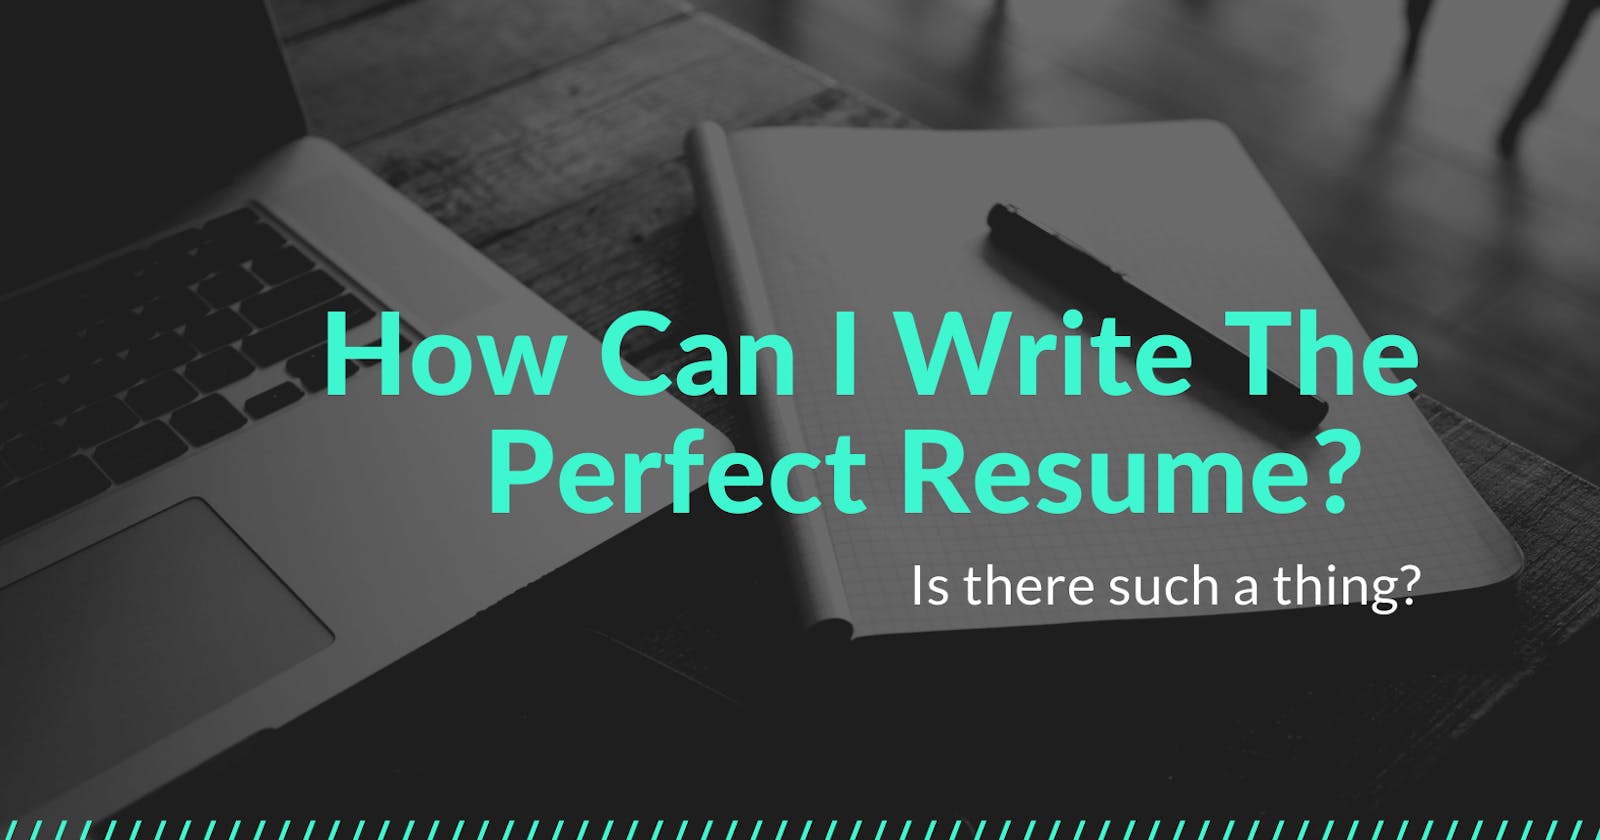 How Can I Write The Perfect Resume?